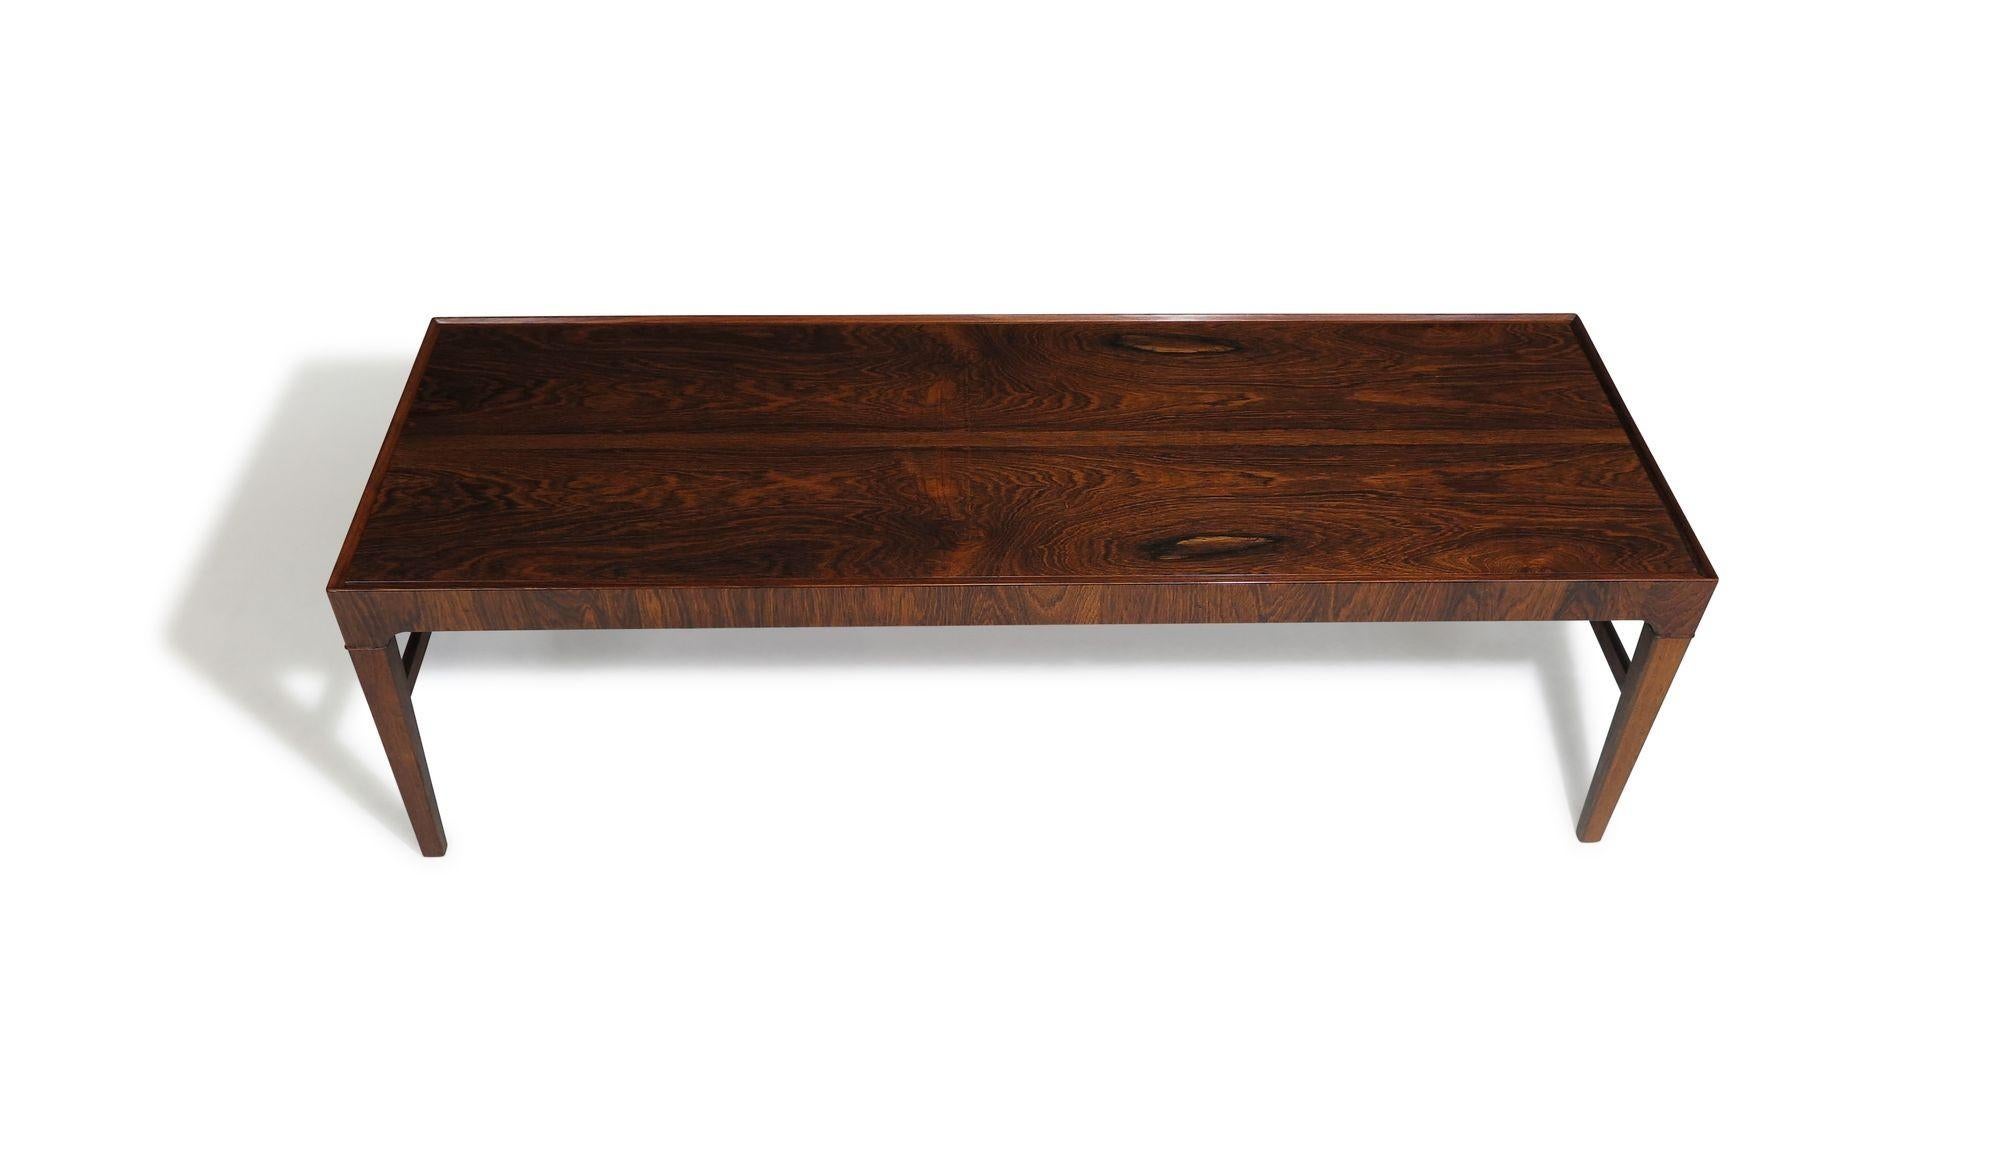 Elegant Frits Henningsen Danish Rosewood Coffee Table In Excellent Condition For Sale In Oakland, CA